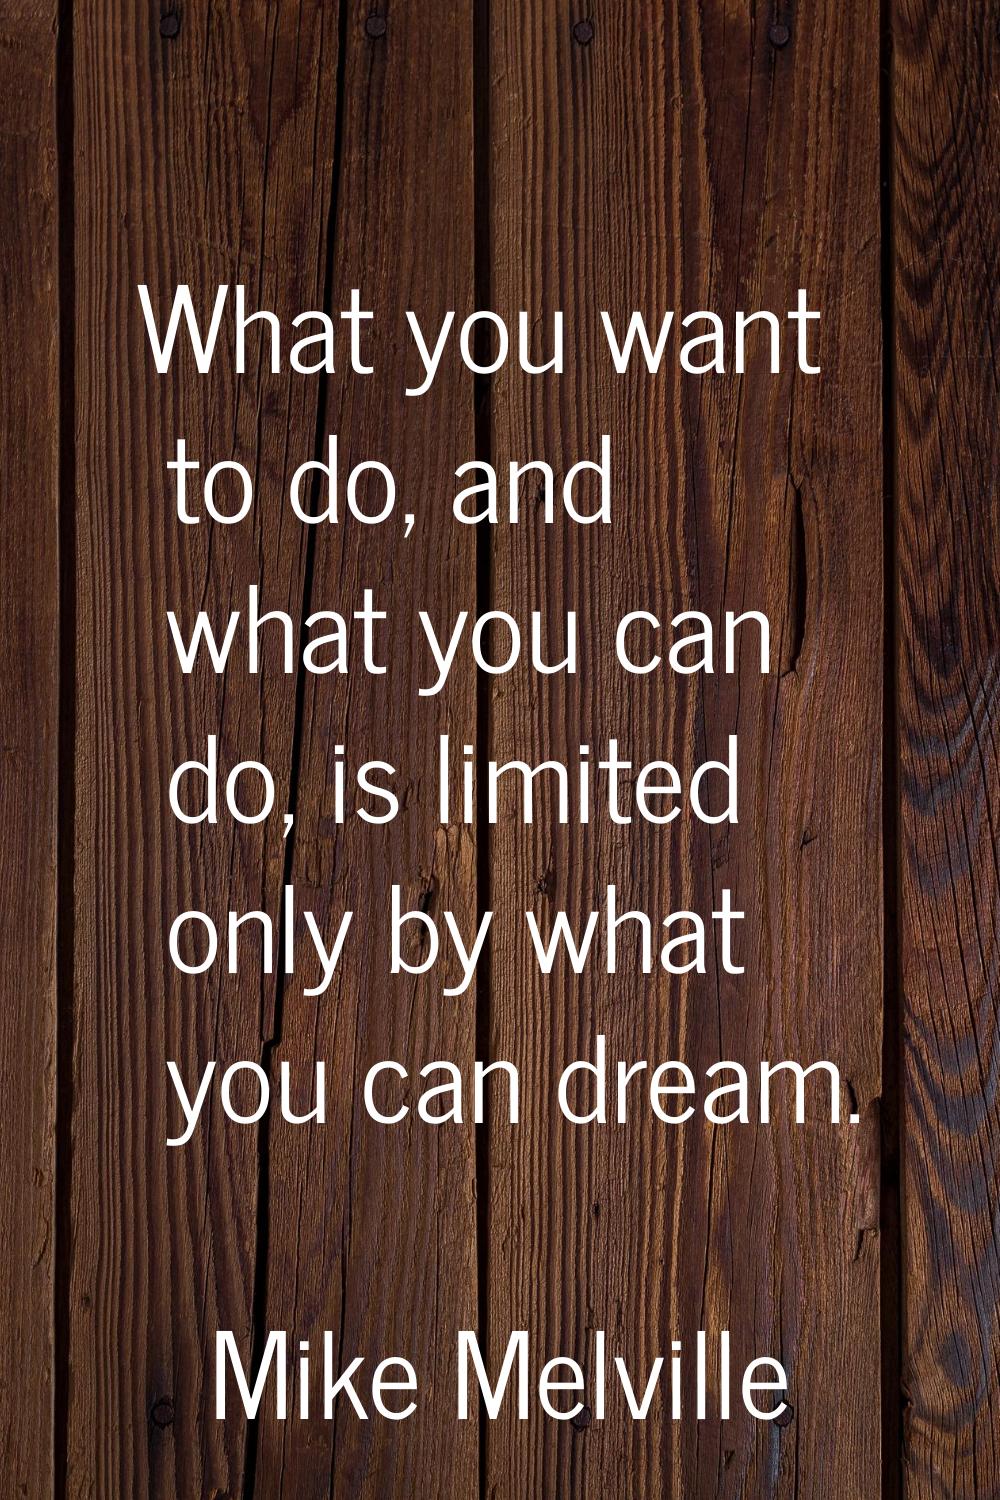 What you want to do, and what you can do, is limited only by what you can dream.